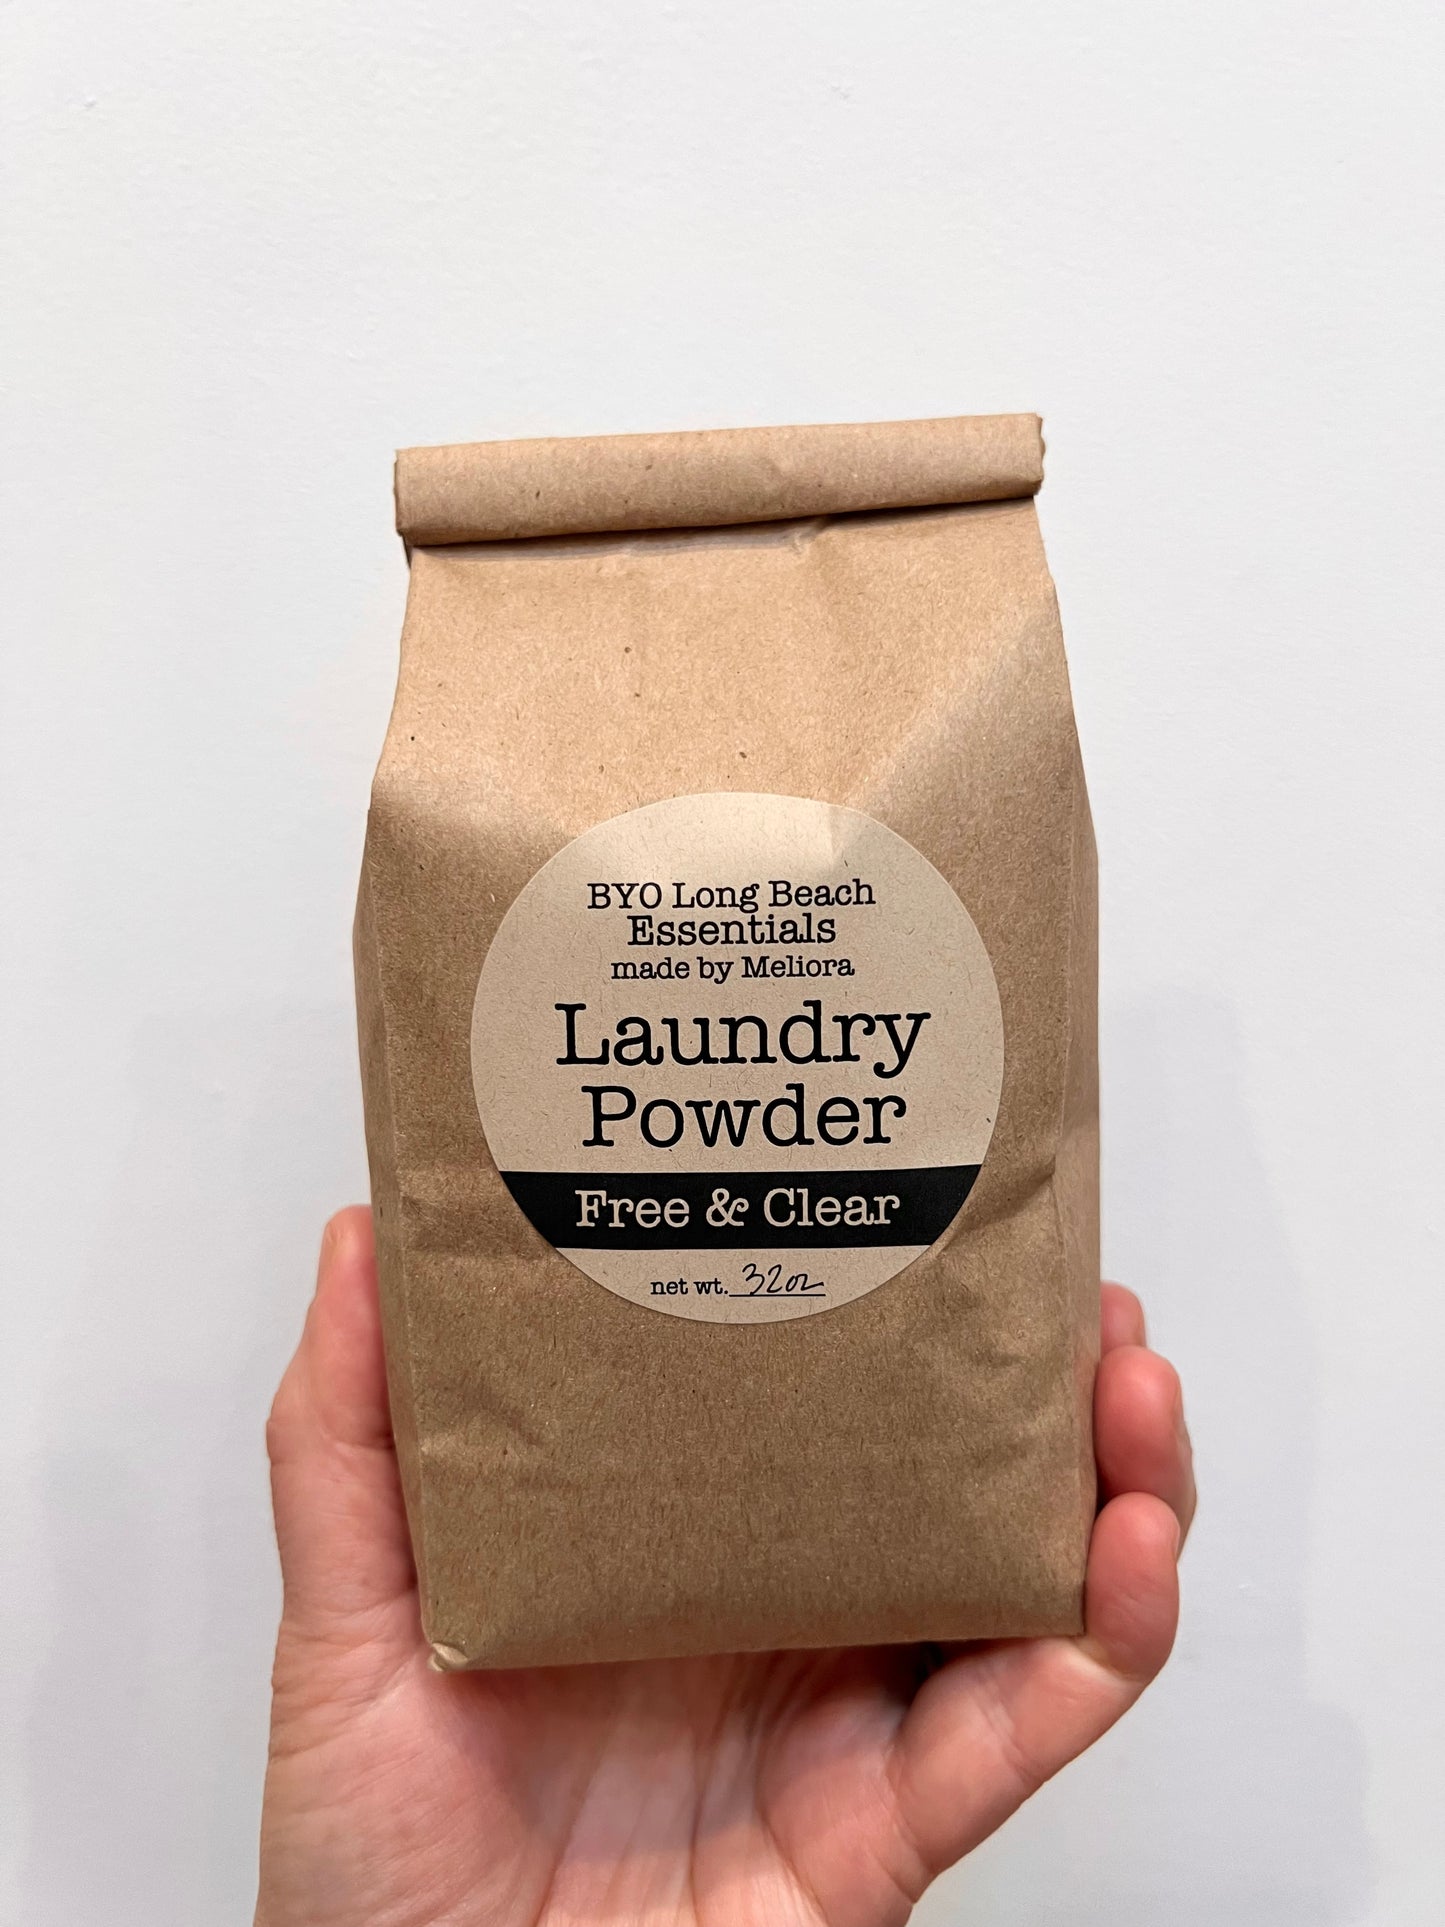 Laundry Powder by Meliora | Packaged